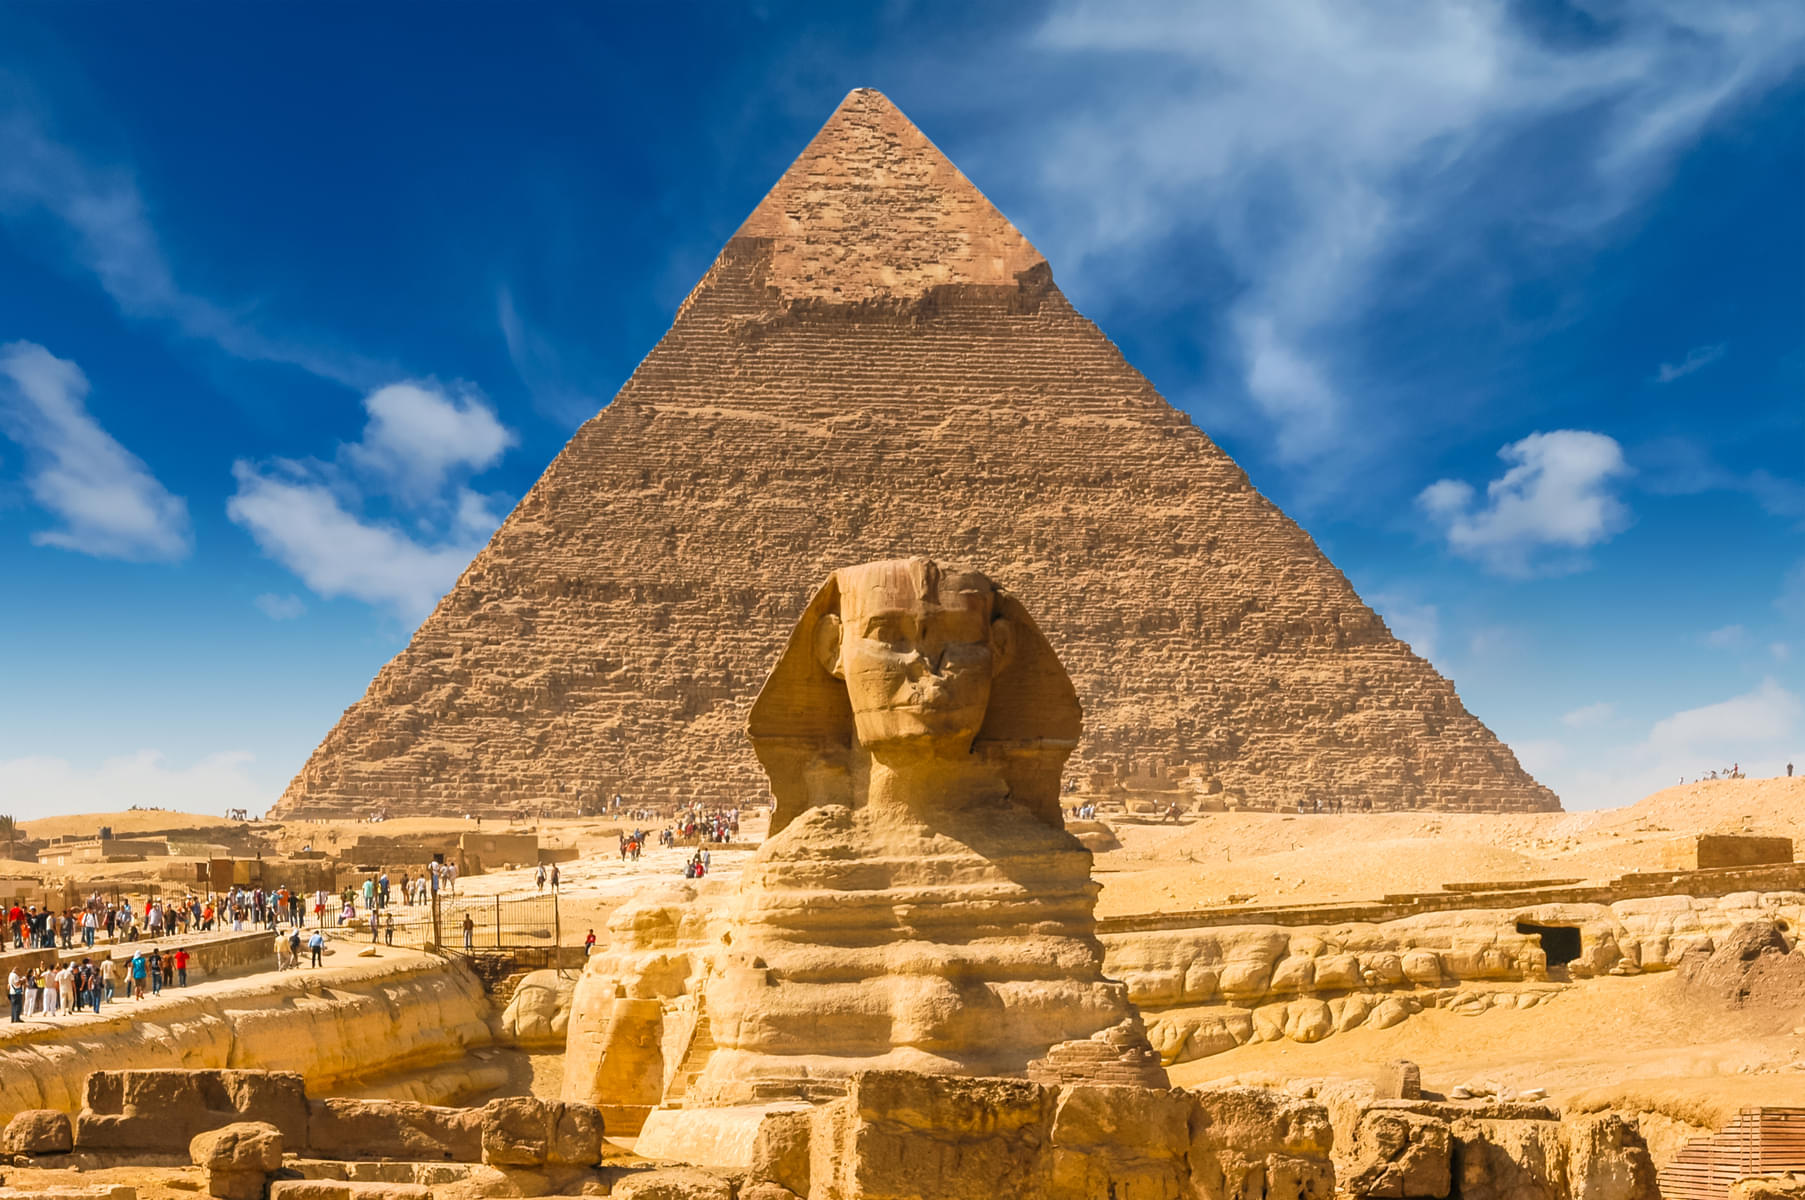 Explore the Giza plateau and look at the ancient architectural wonders